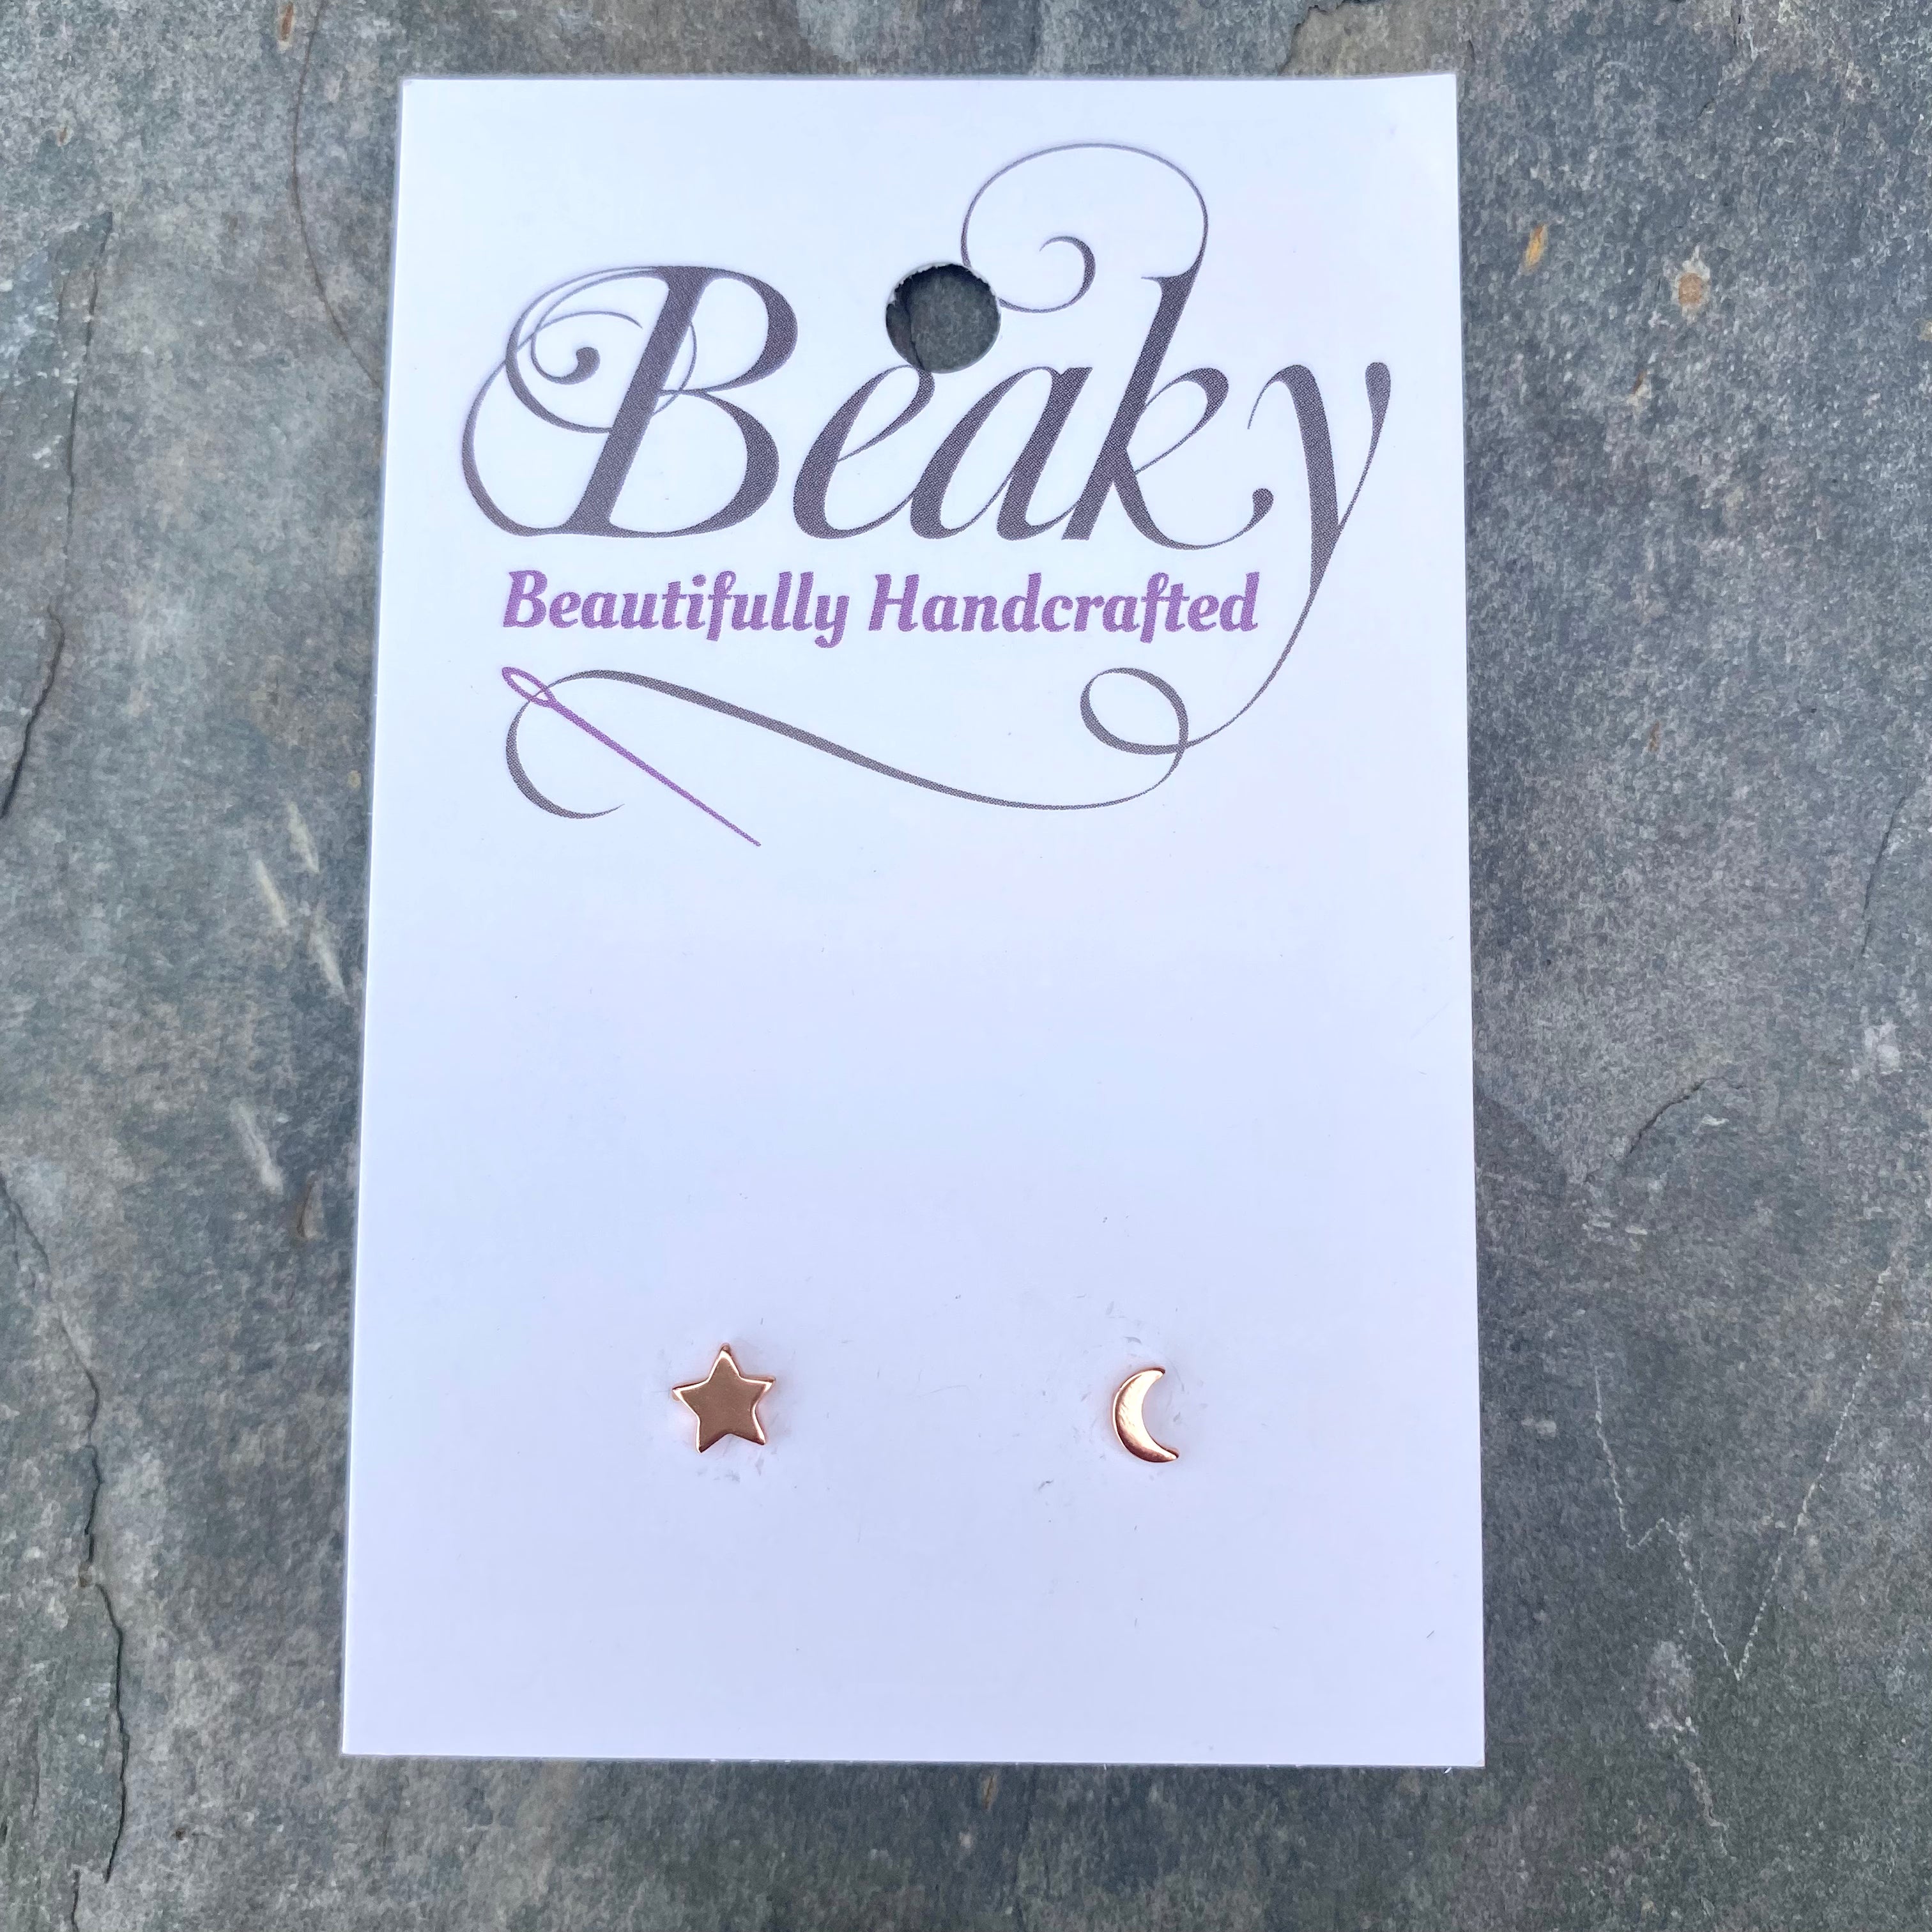 Moon and Star Stud Earrings- Rose Gold Plated Sterling Silver Jewellery